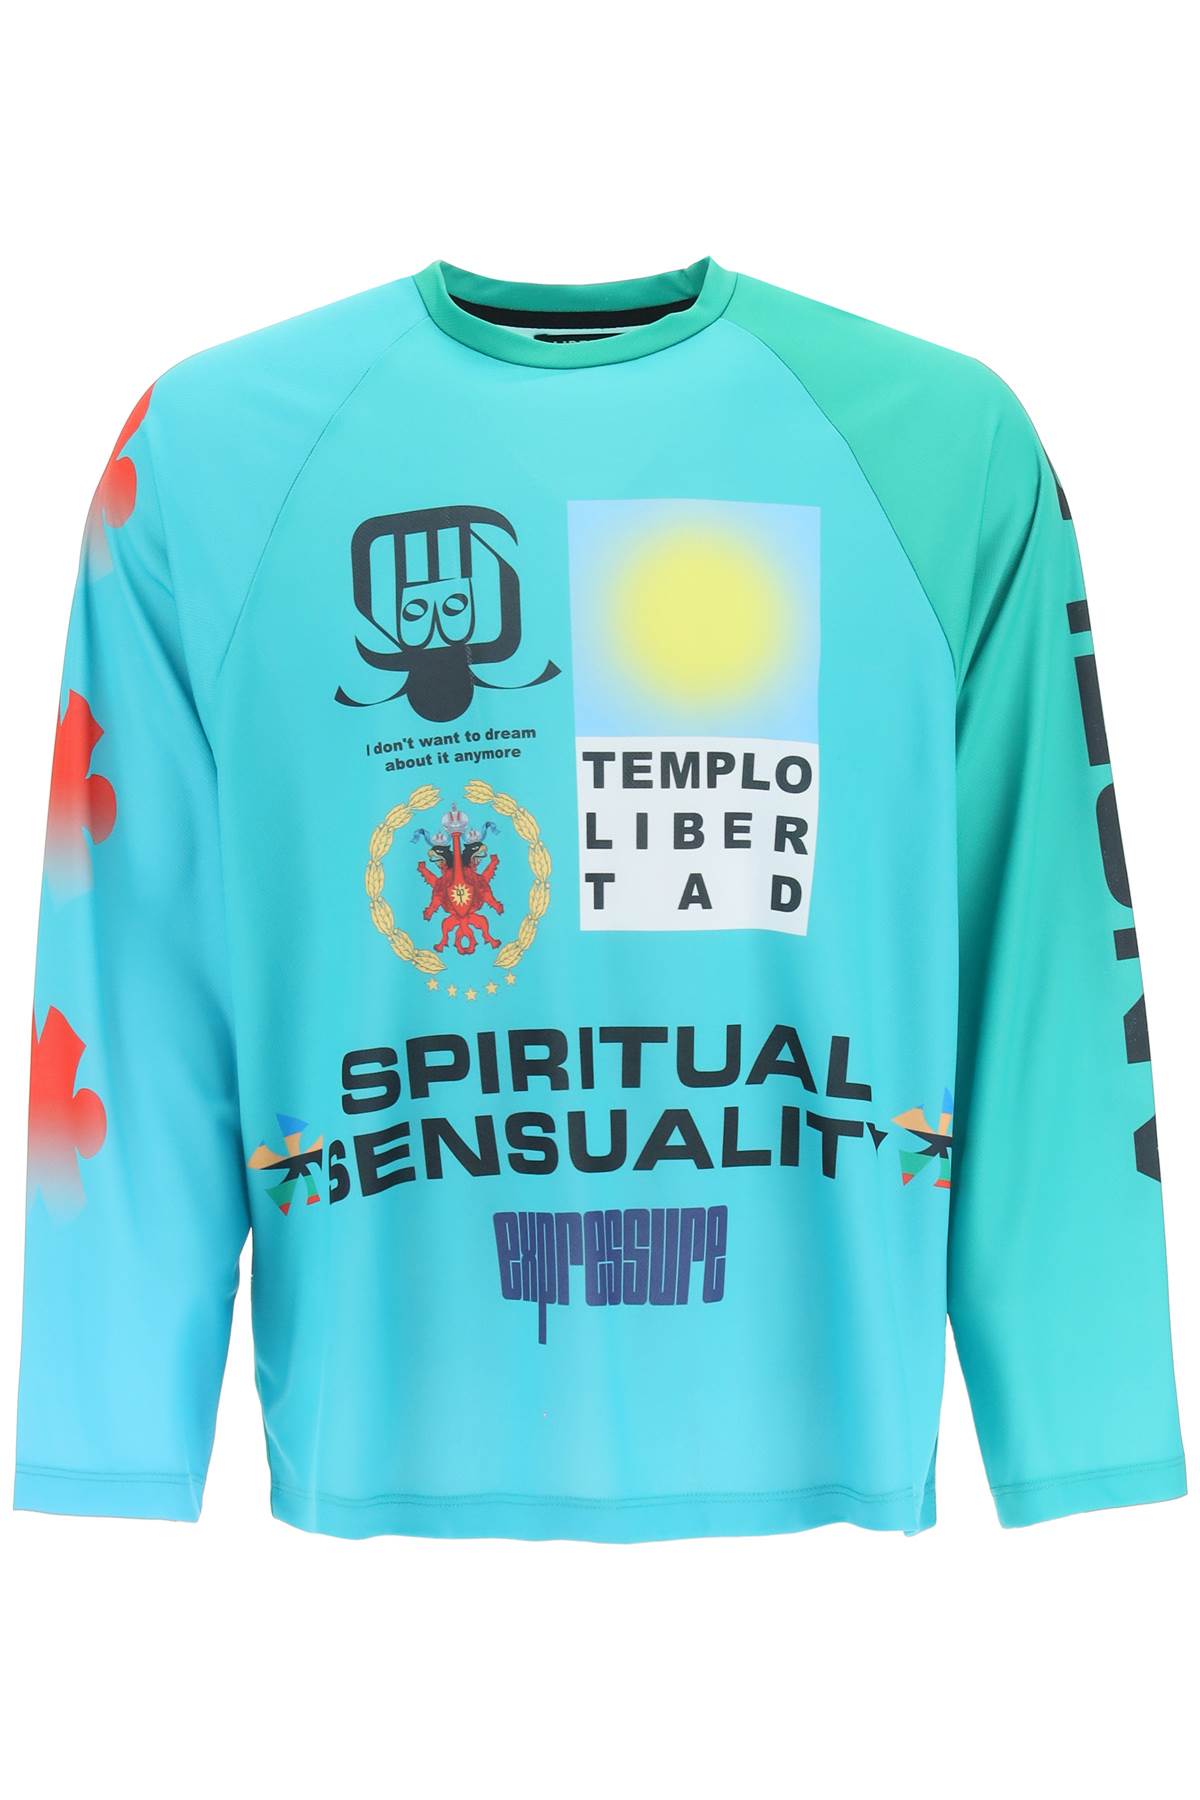 Liberal Youth Ministry Multilogo Football Long-sleeved T-shirt